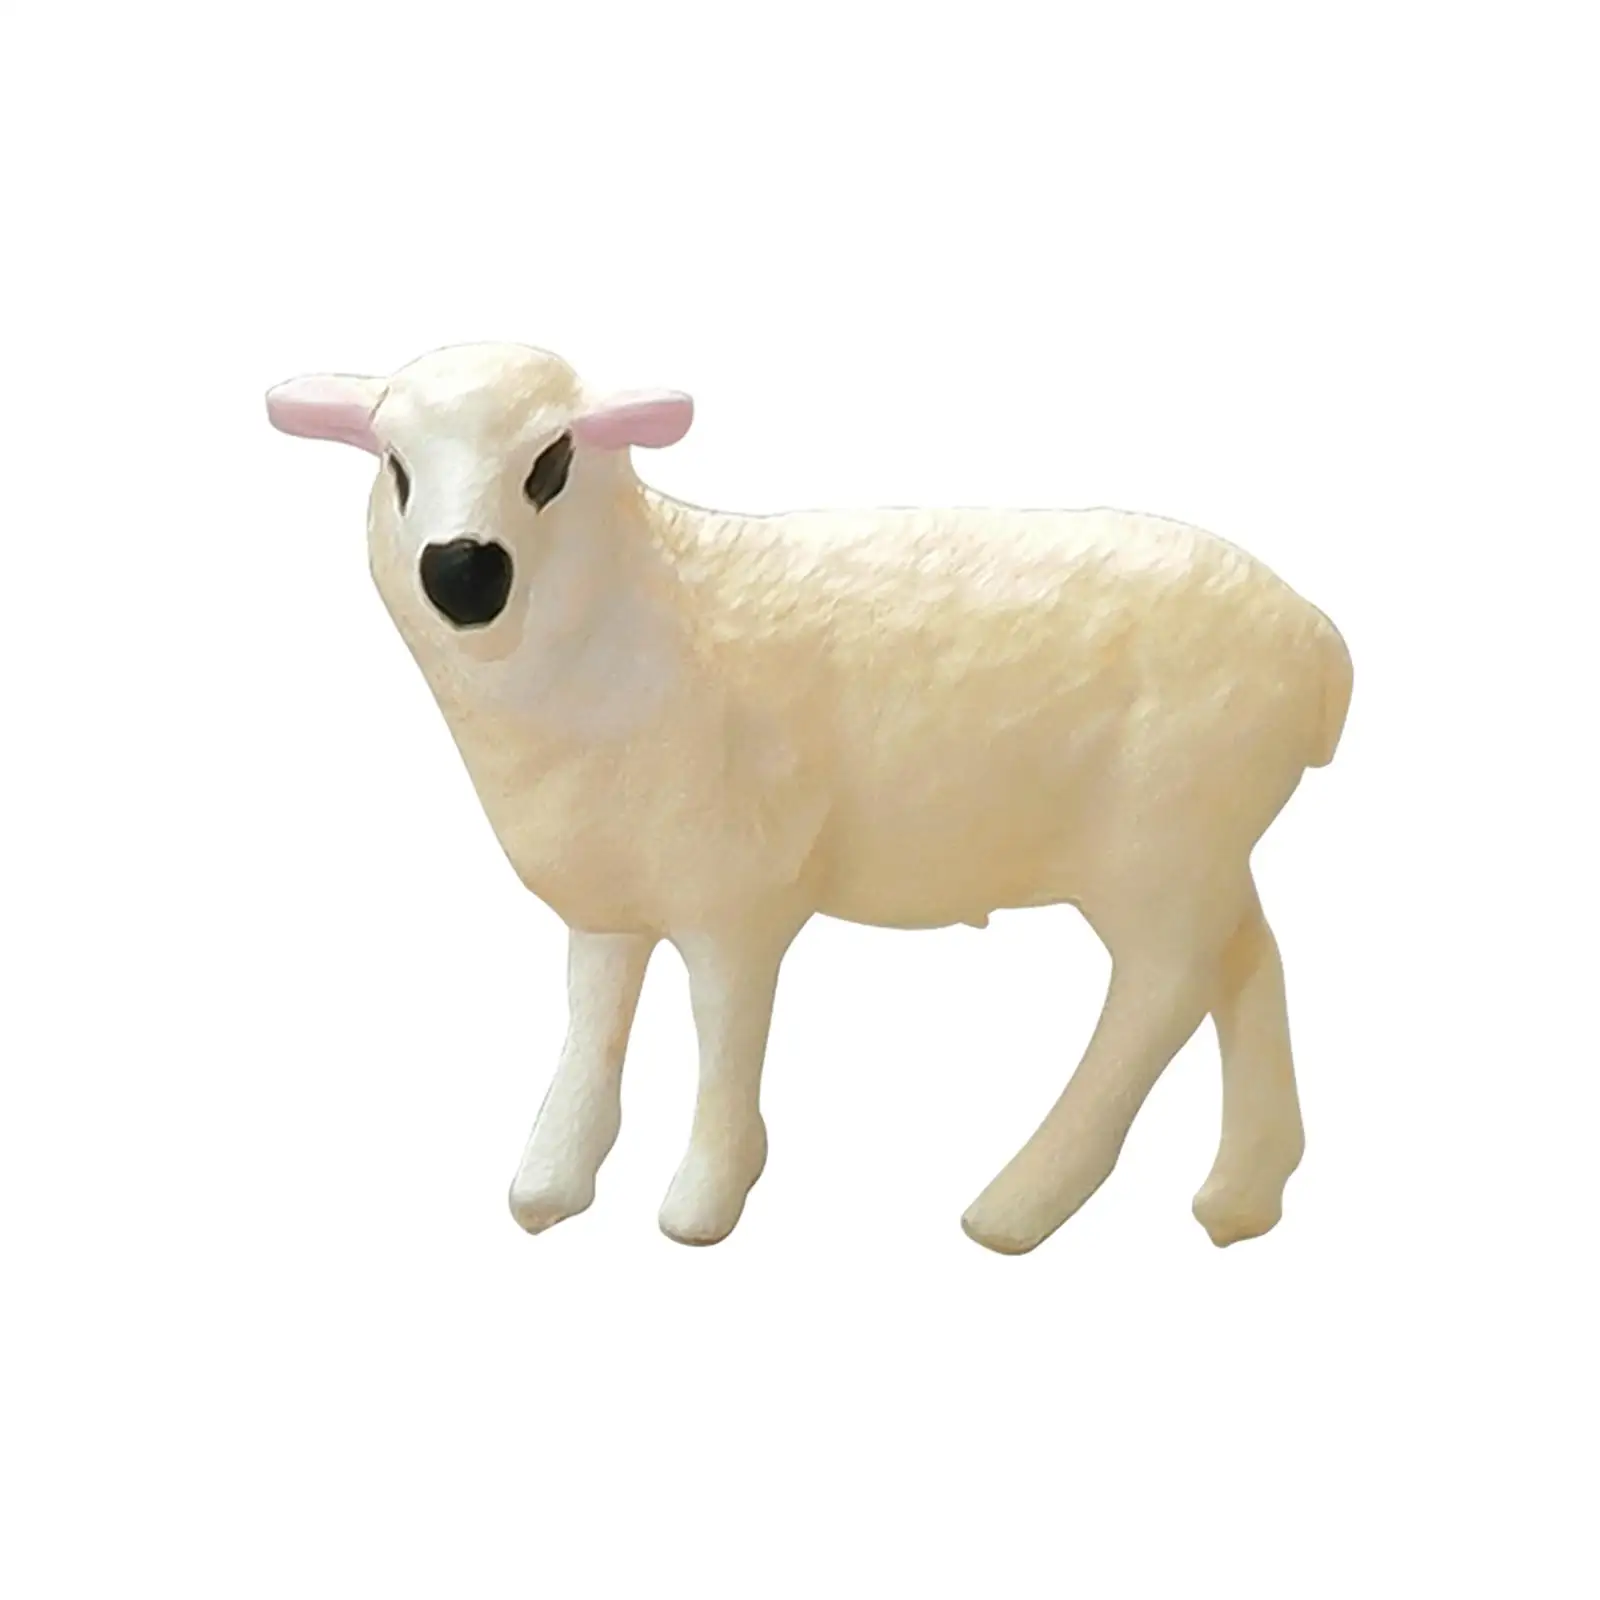 Sheep Model 1:64 Hand Painted Toy Sheep Figurine Model Building Kits